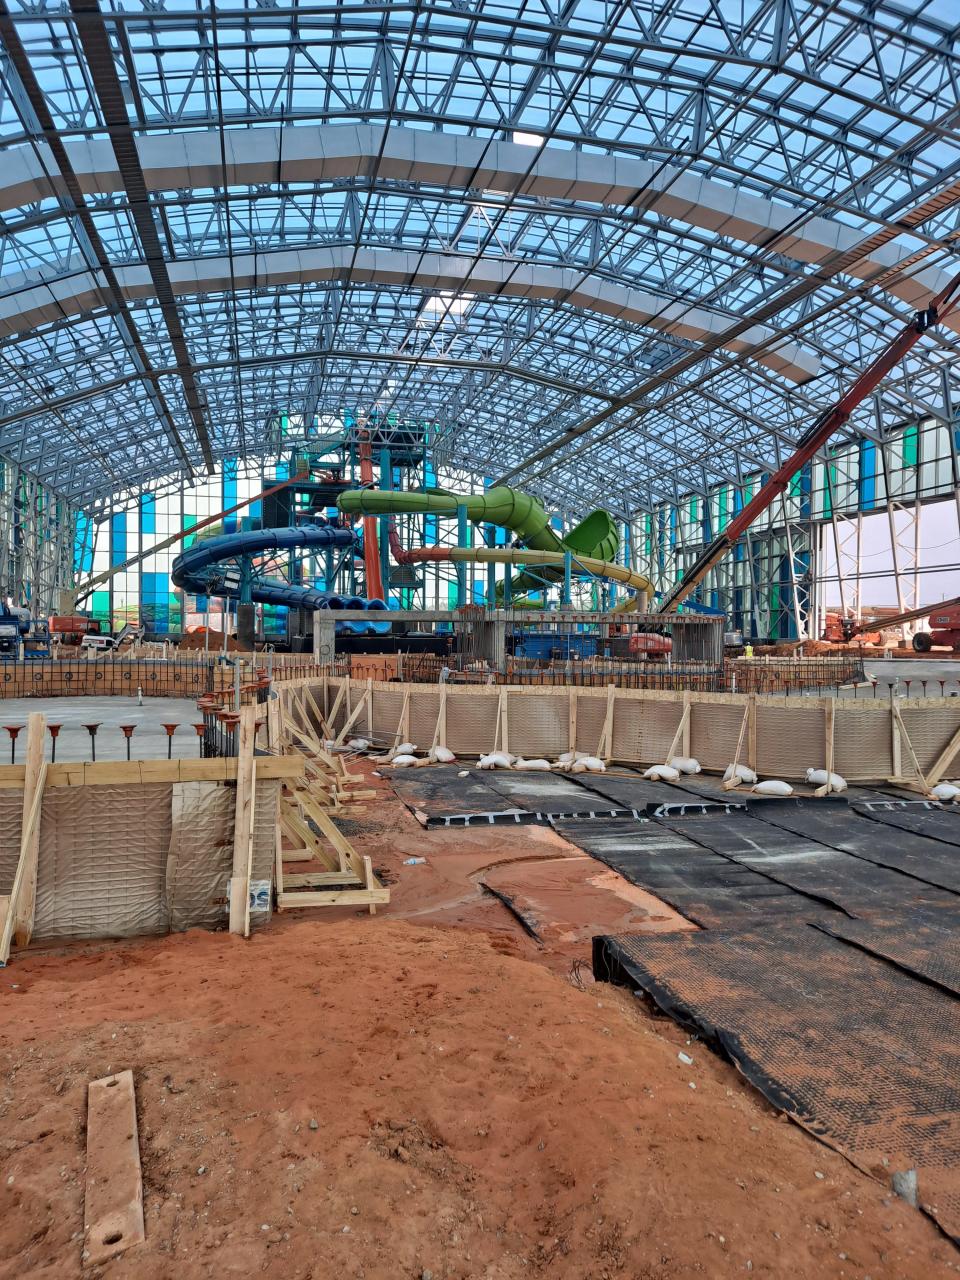 OWA Parks & Resort recently announced updates on Tropic Falls, a 100,000-square-foot indoor water park expected to open in Foley, Alabama, this May.